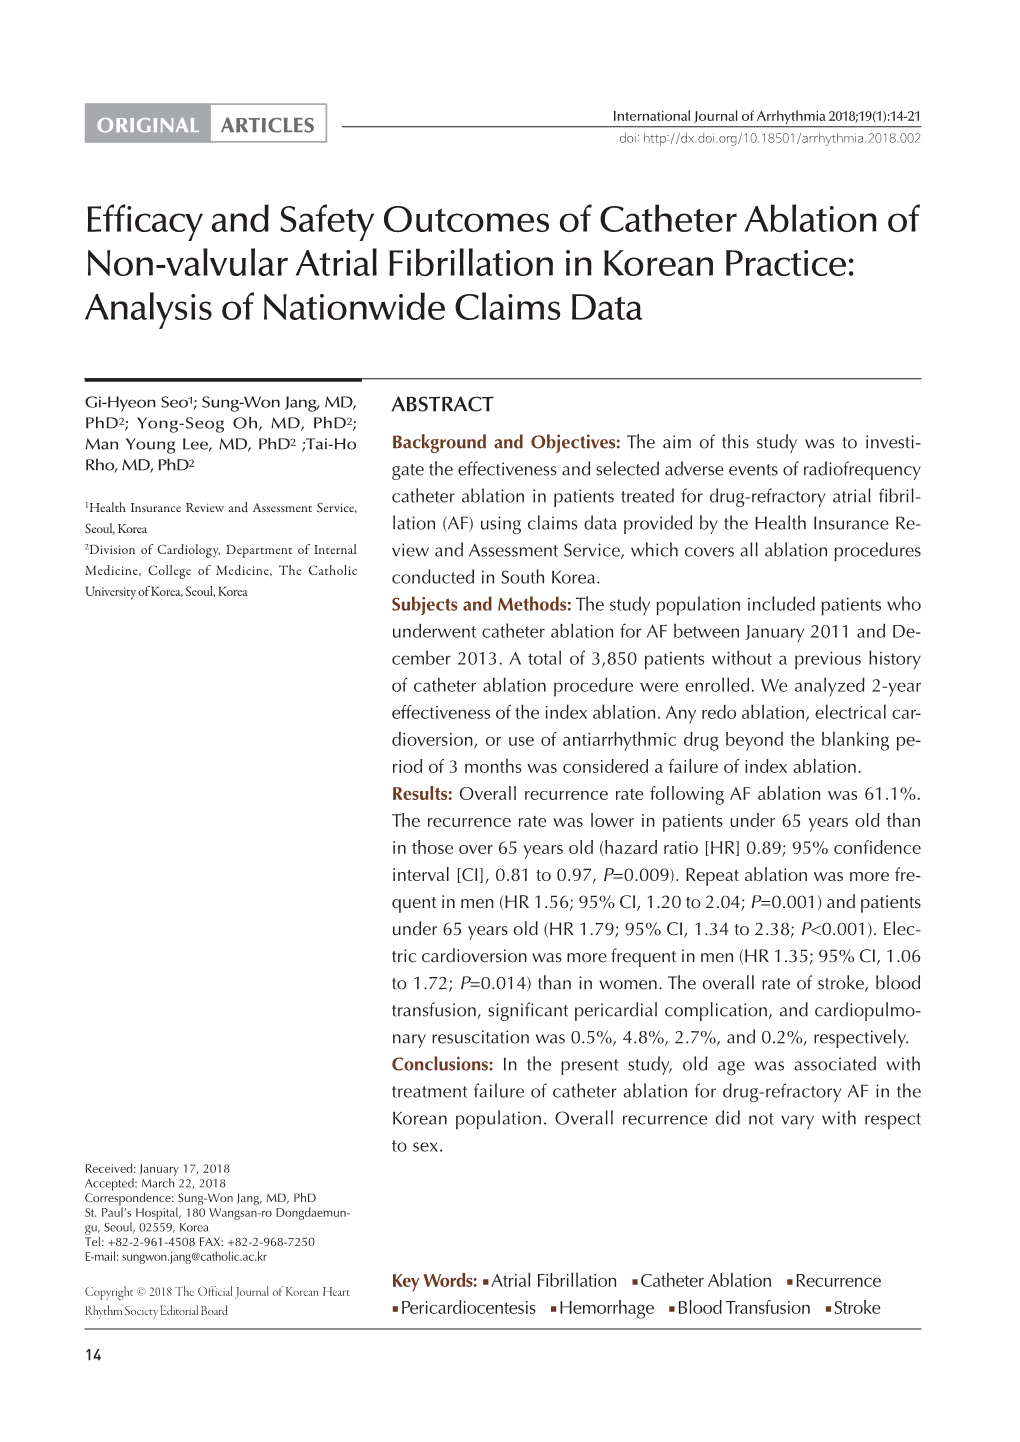 Efficacy and Safety Outcomes of Catheter Ablation of Non-Valvular Atrial Fibrillation in Korean Practice: Analysis of Nationwide Claims Data